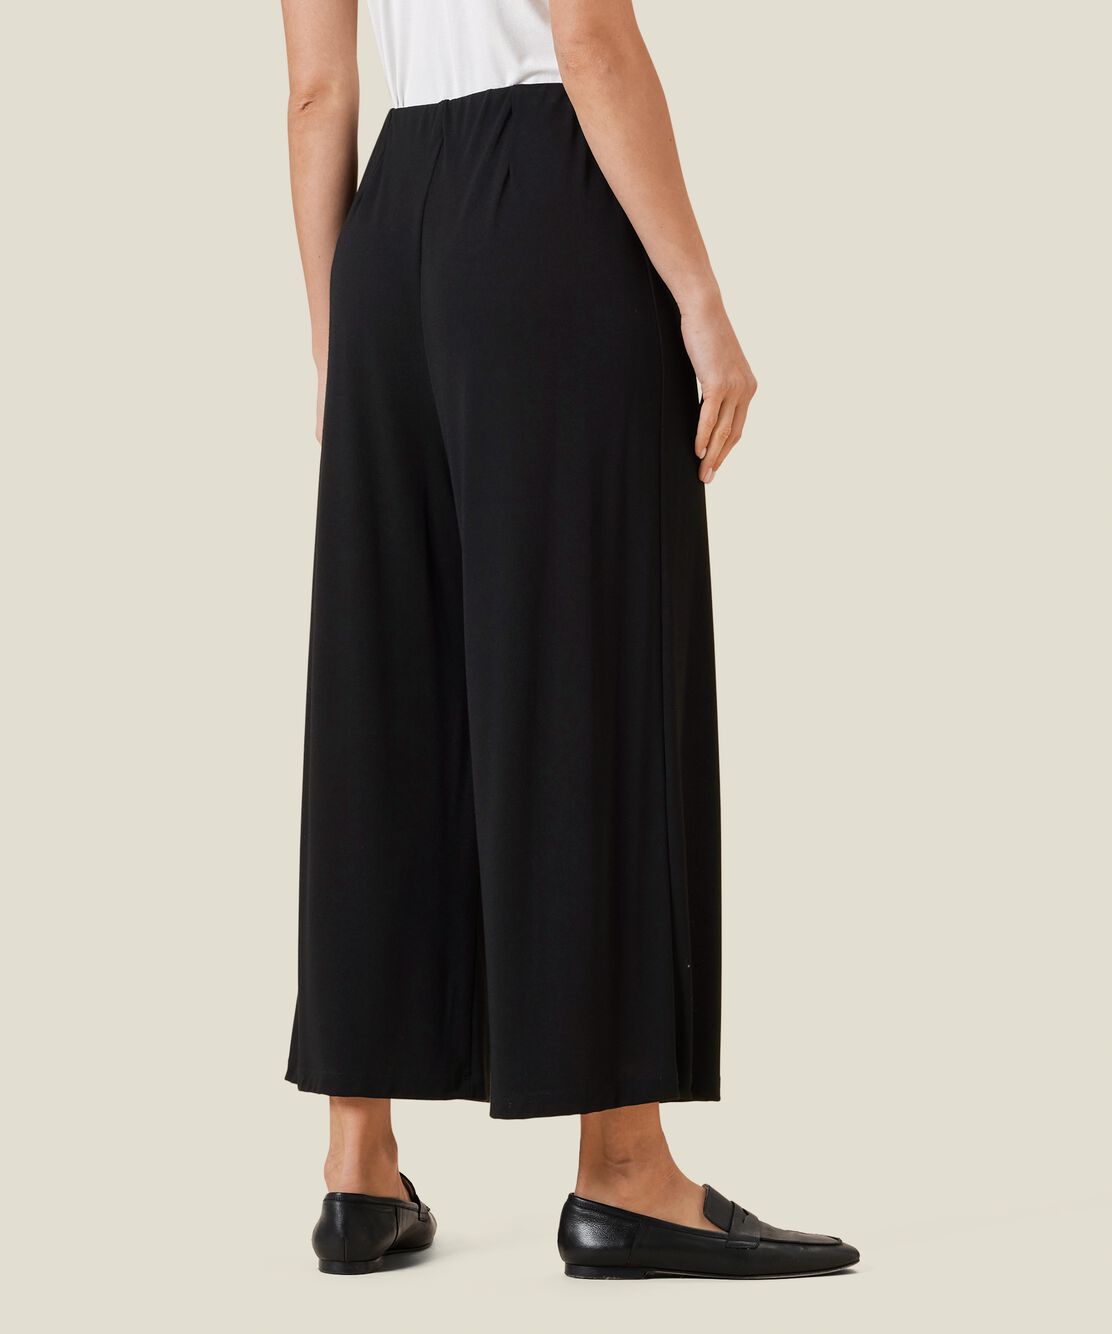 PAM JERSEY TROUSERS, Black, hi-res